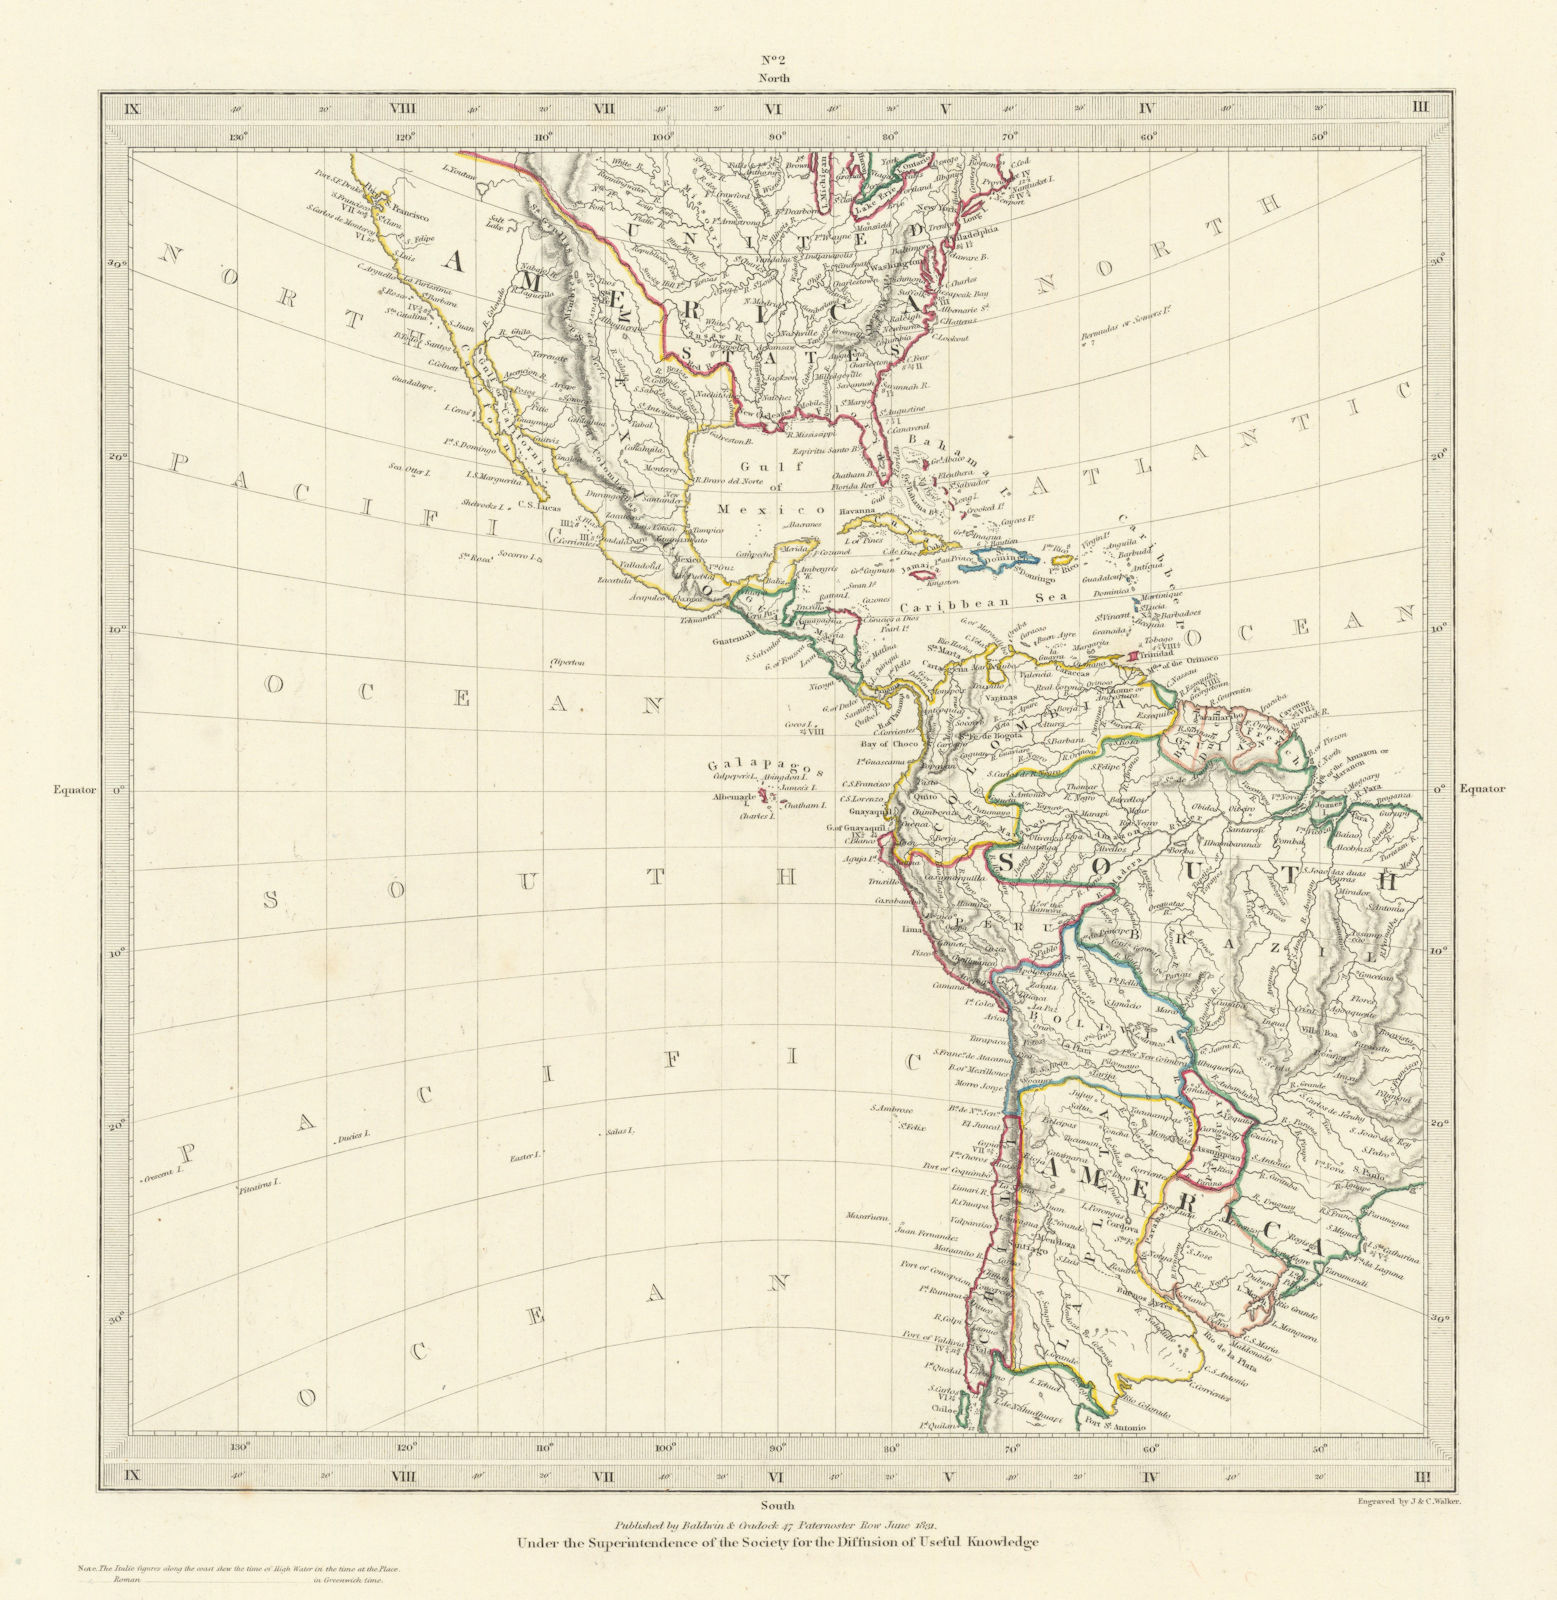 AMERICAS. Gnomonic Projection. Shows Texas as part of Mexico. SDUK 1844 map